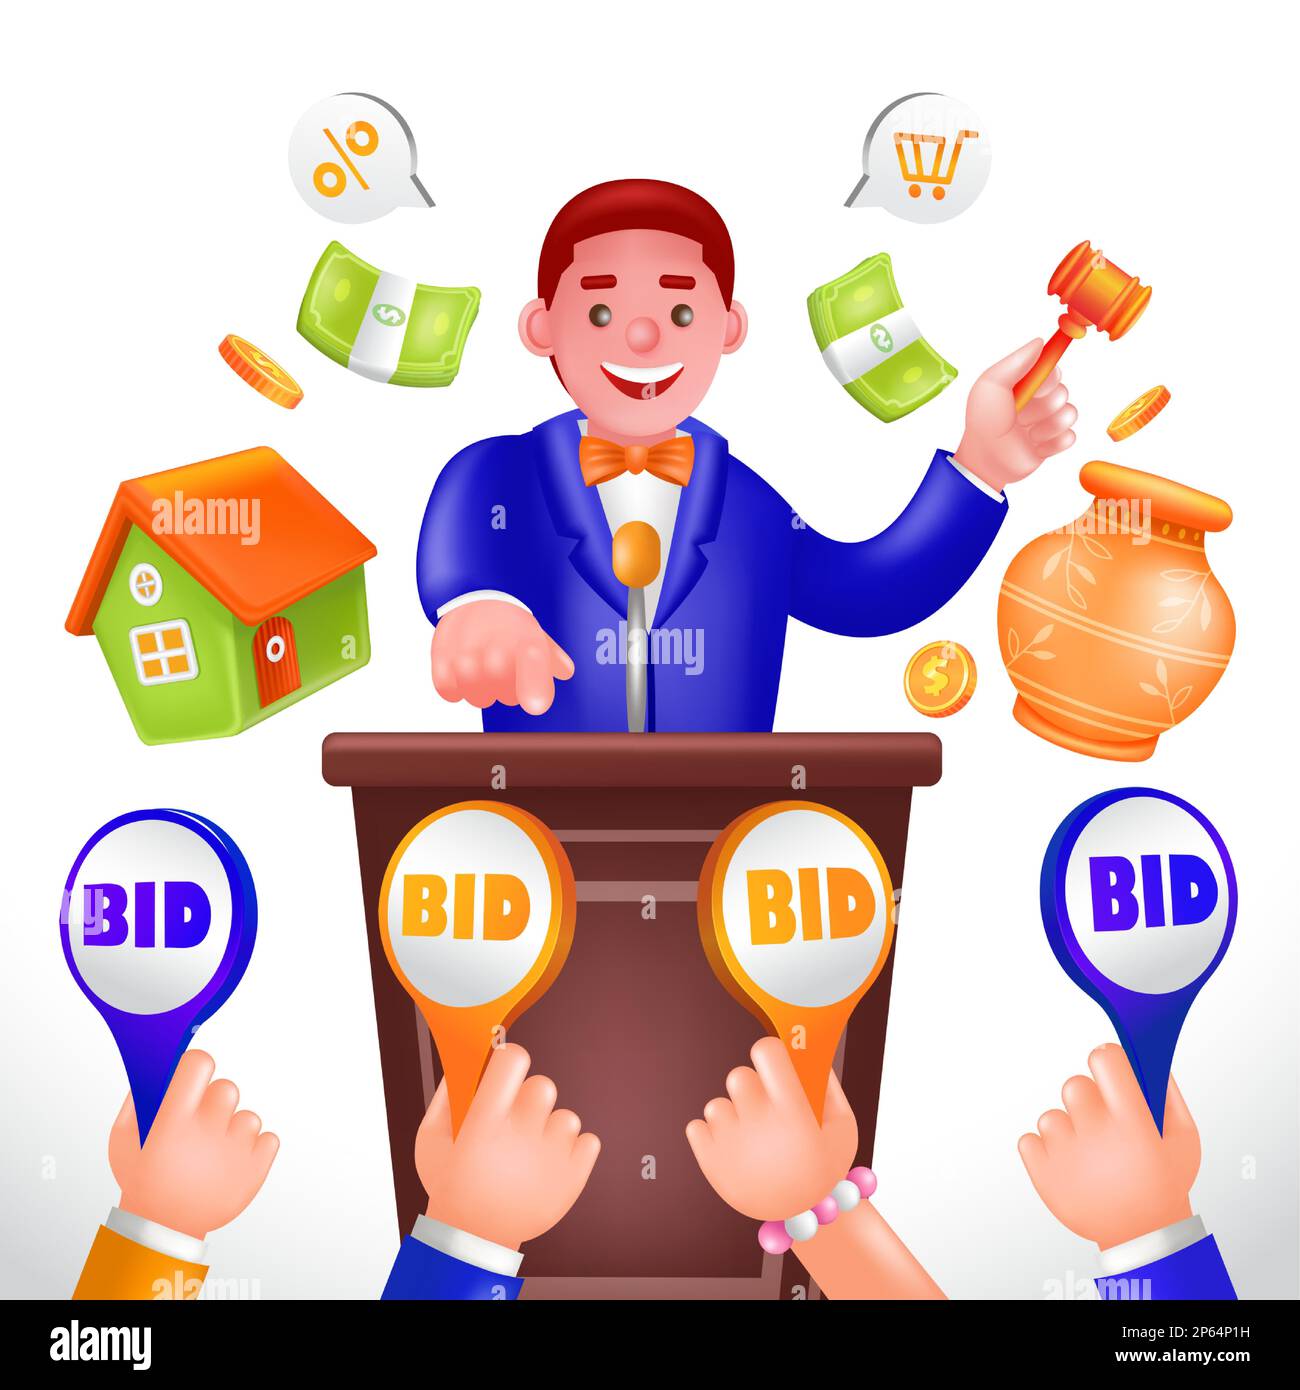 Auction, 3d illustration of an auctioneer speaking into a microphone and selecting a buyer's bid Stock Vector